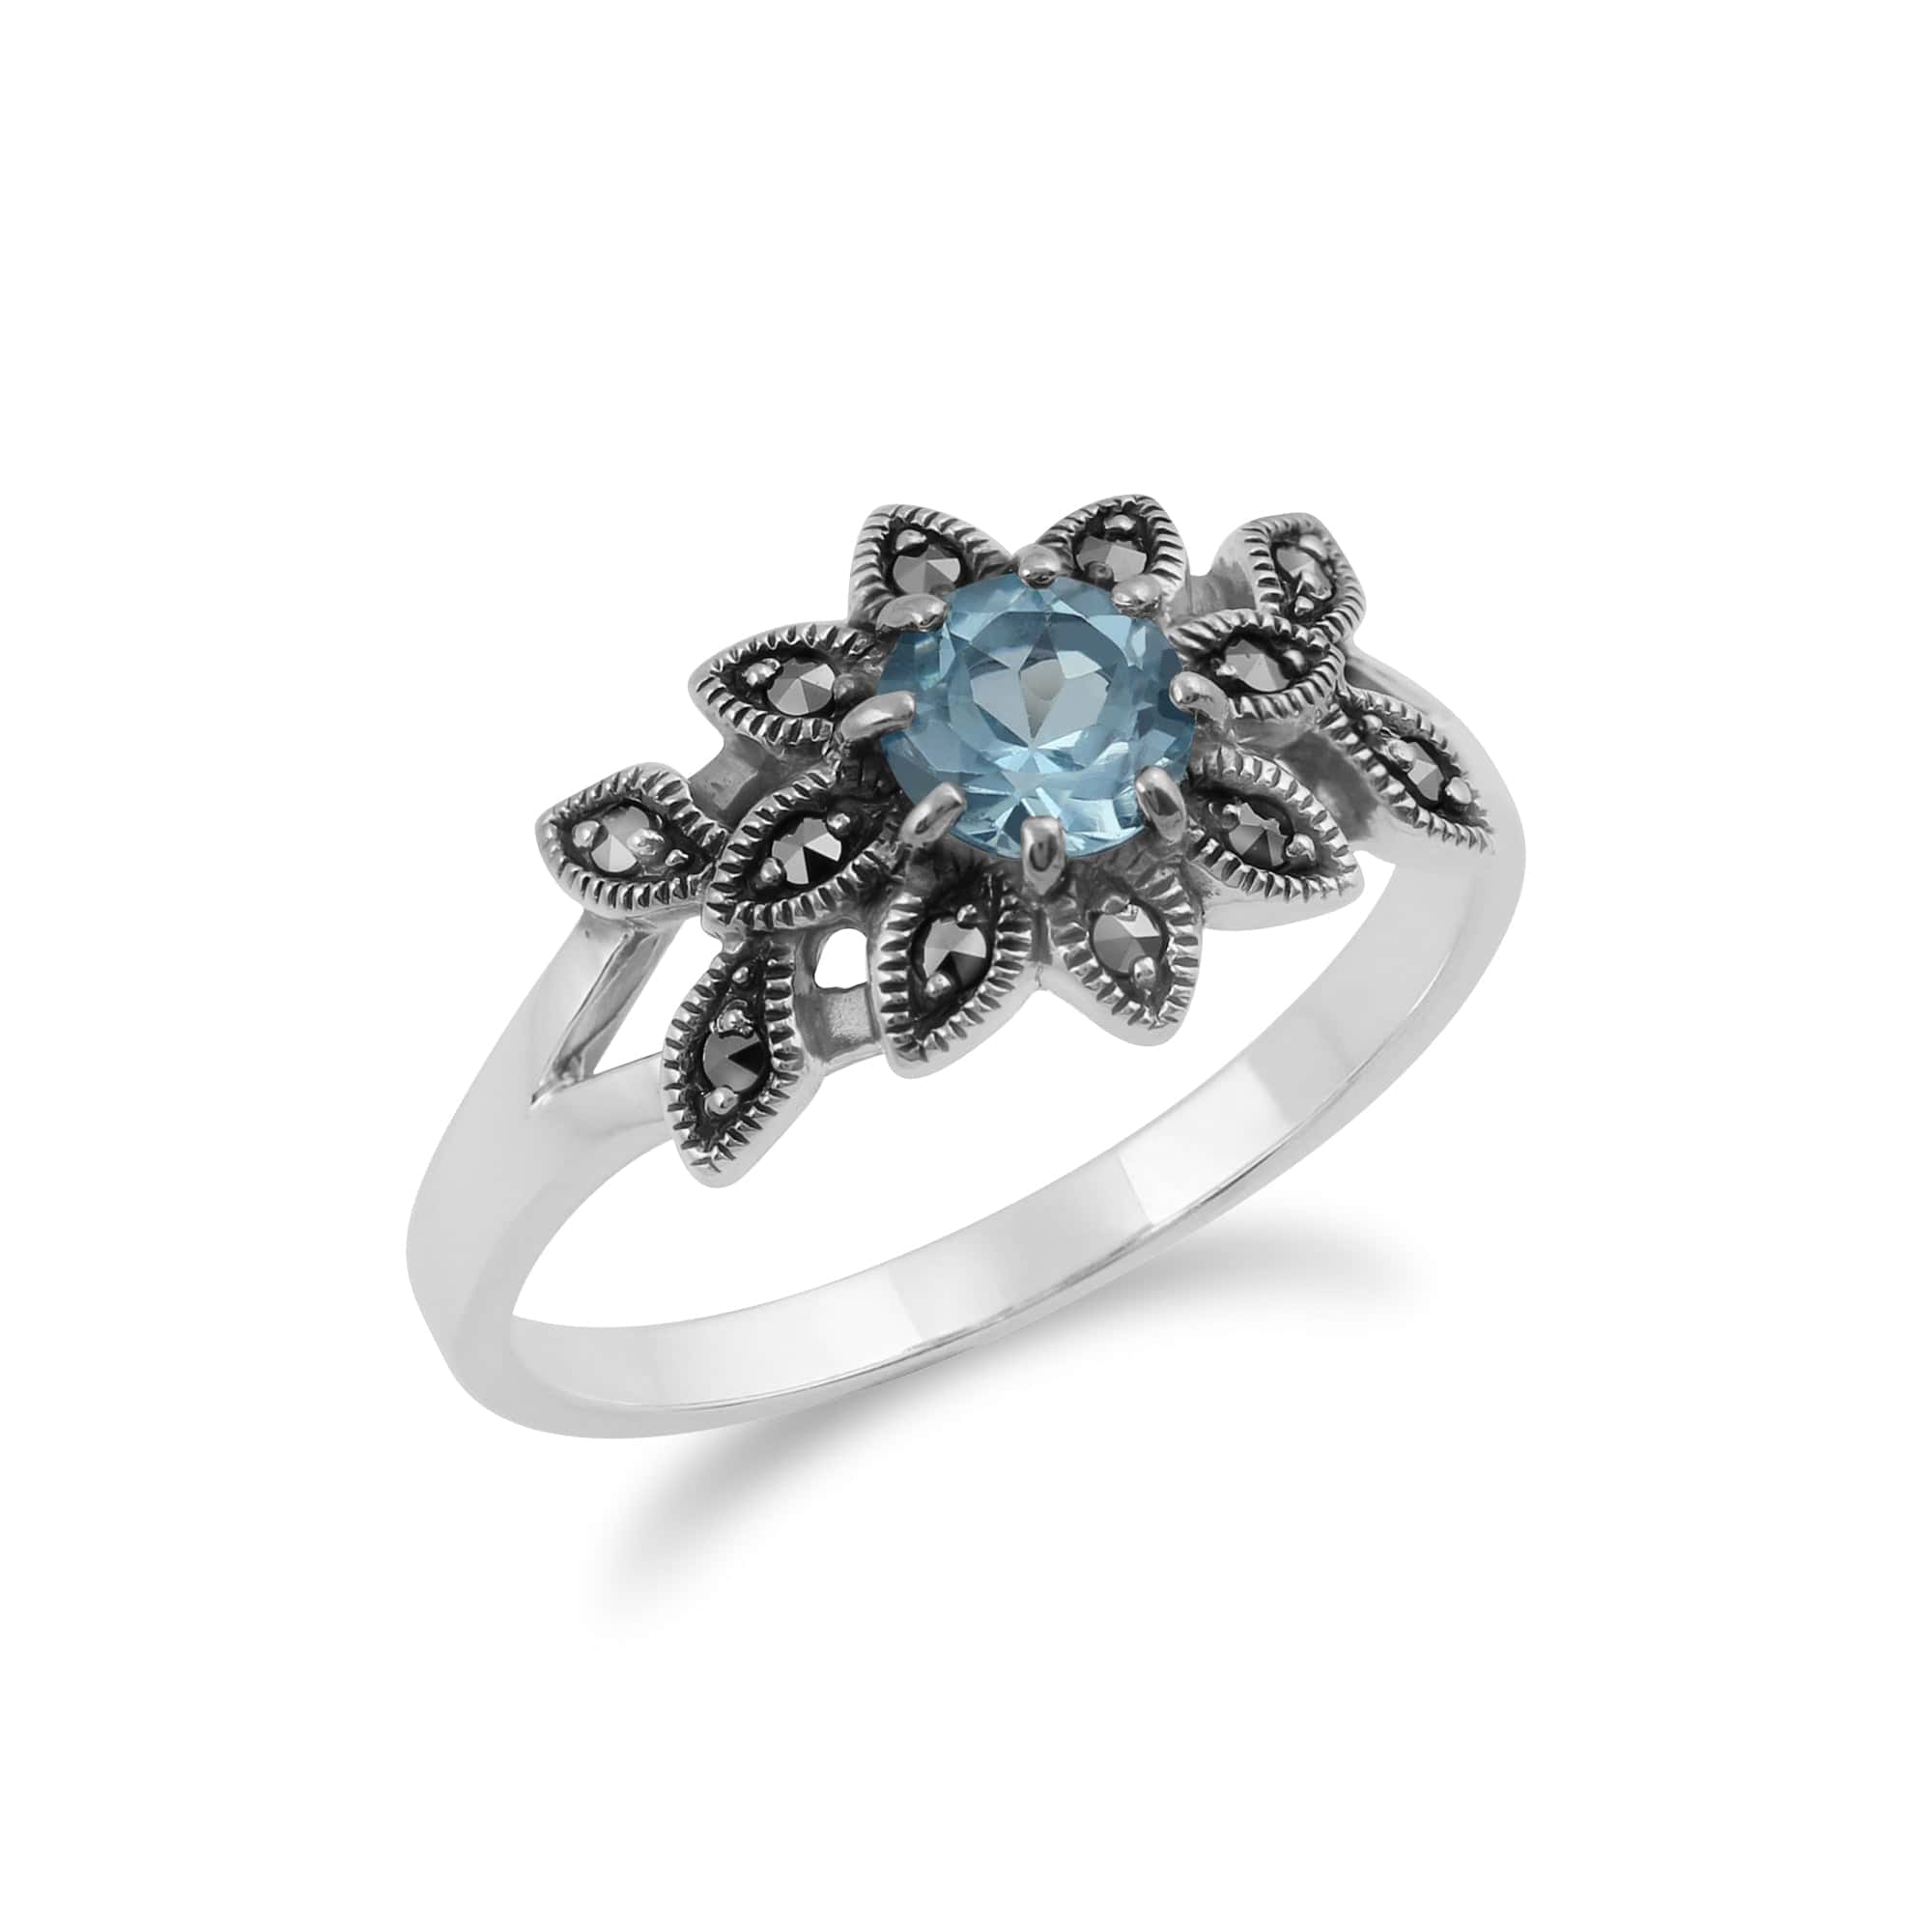 214R467704925 Art Nouveau Style Round Blue Topaz & Marcasite Floral Ring in Sterling Silver 2